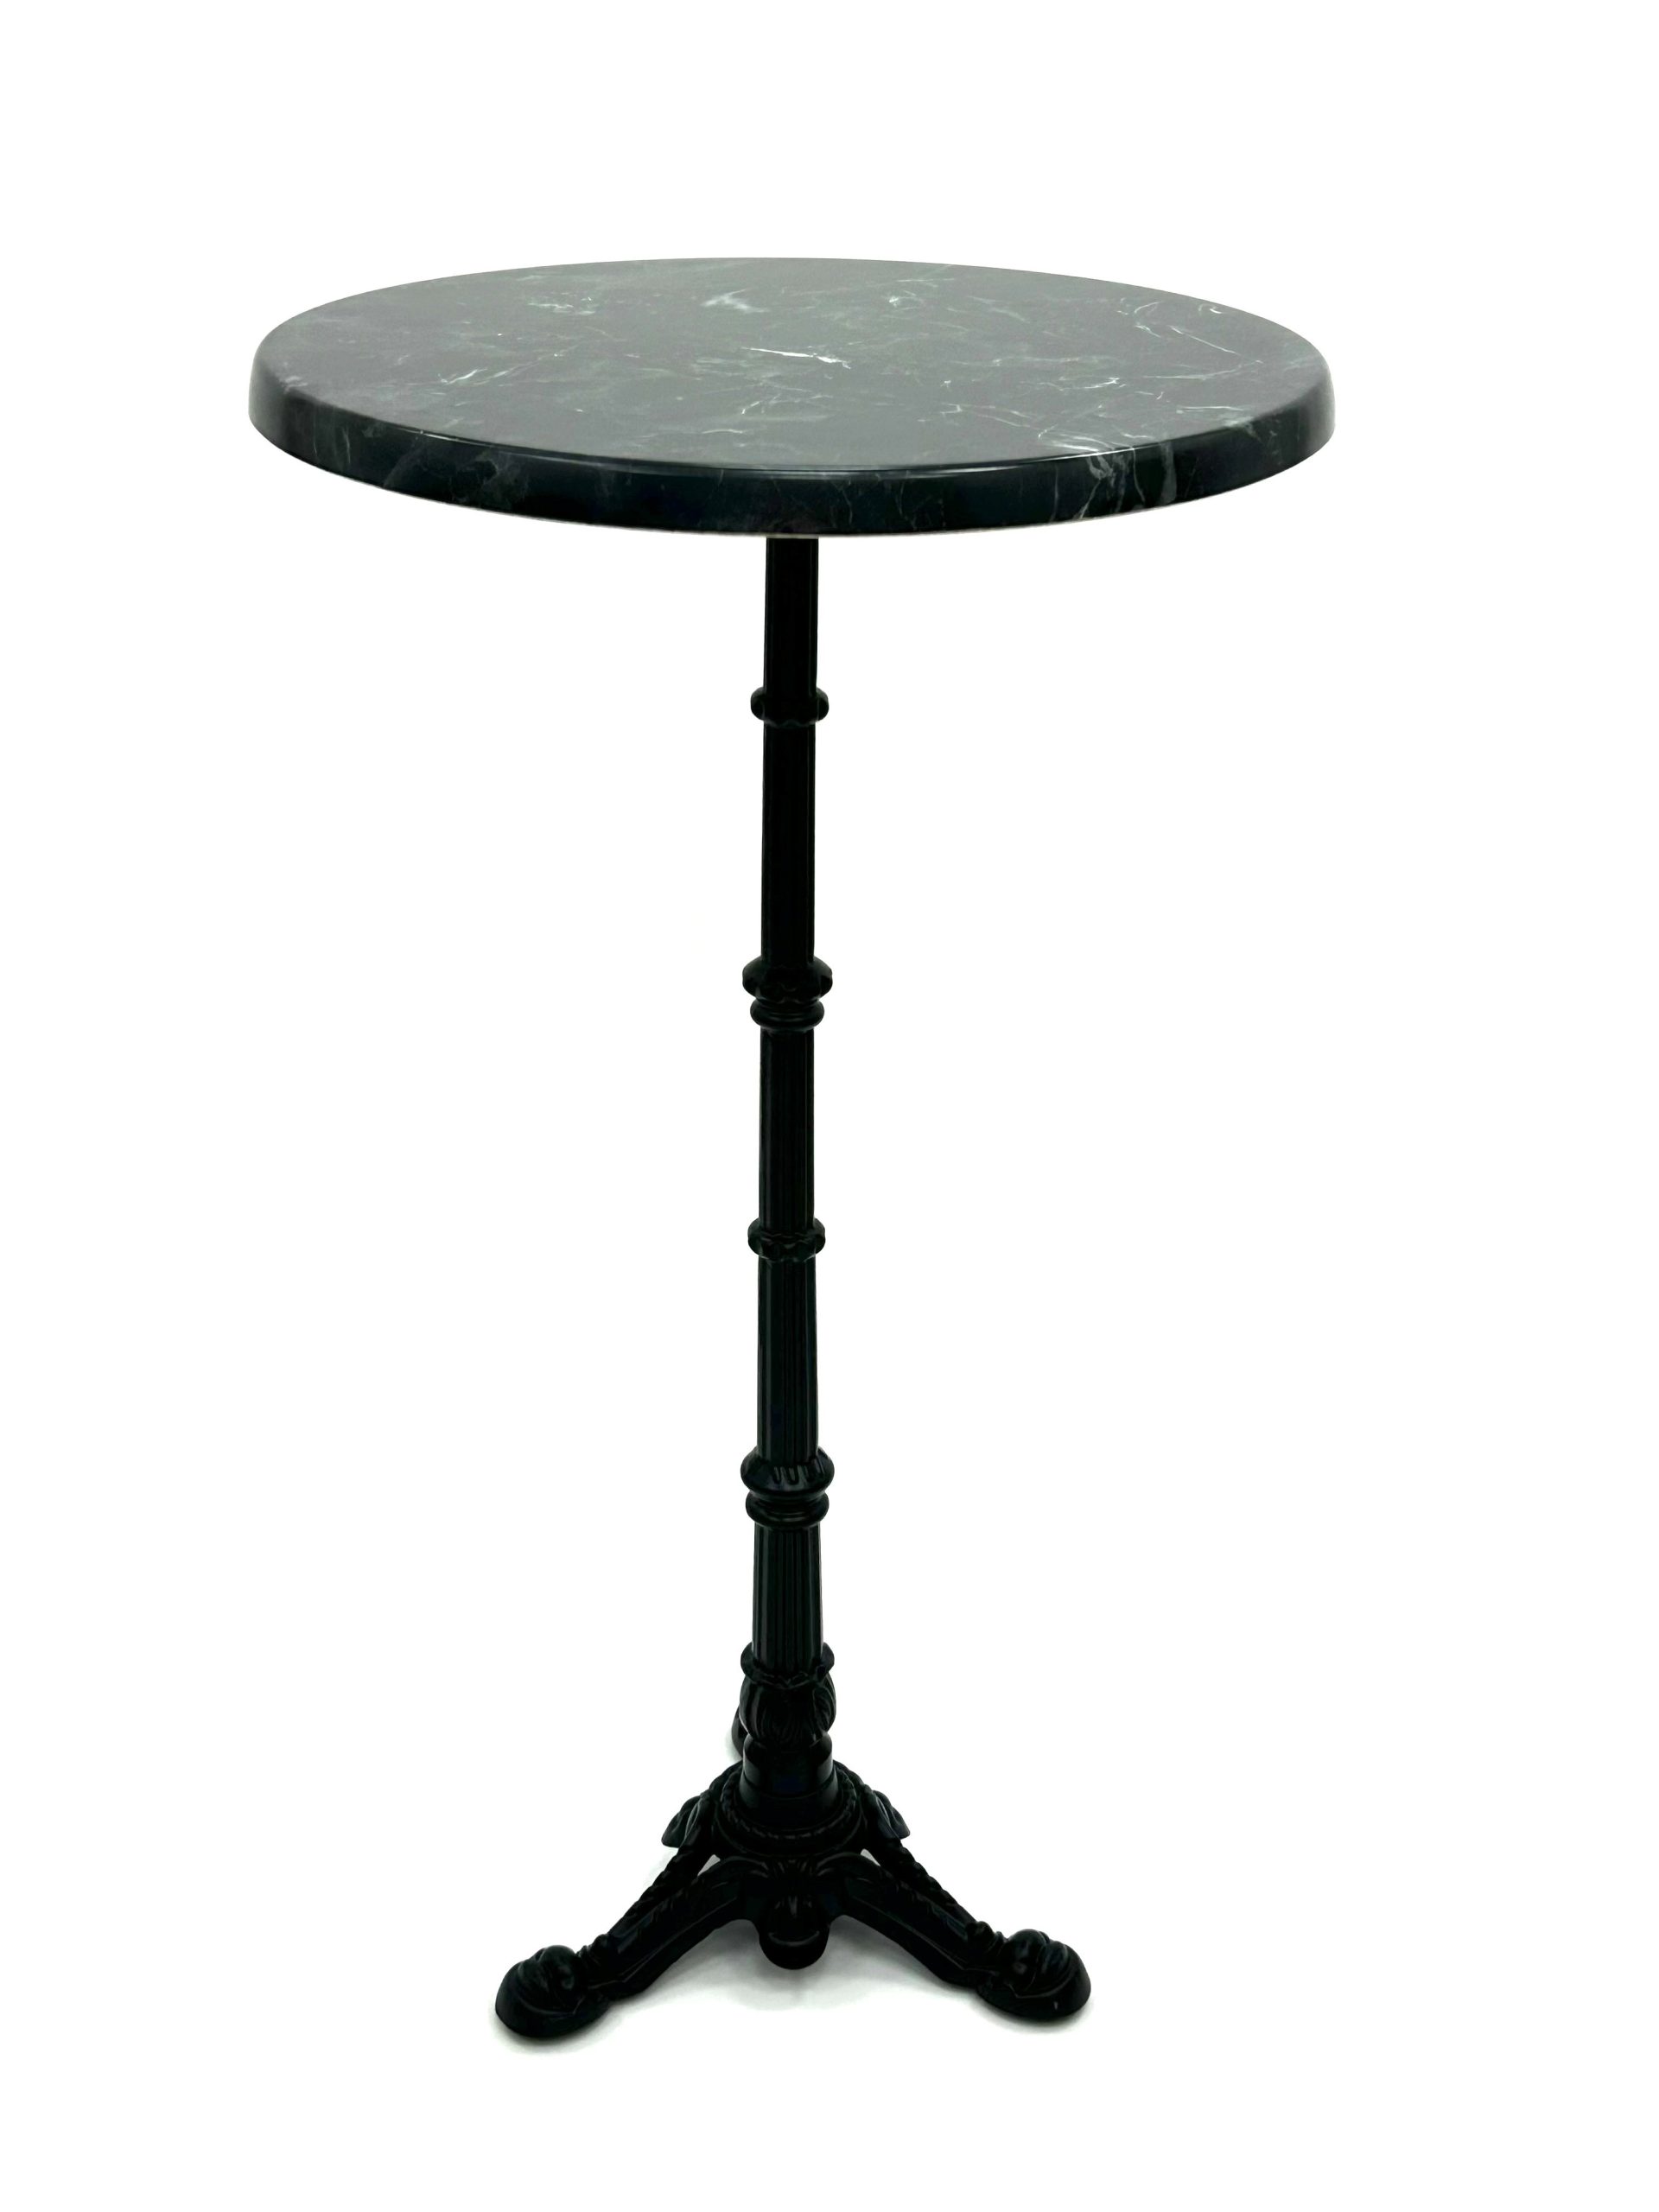 UK Suppliers Of High Quality Stavelot Cast Iron High Tables